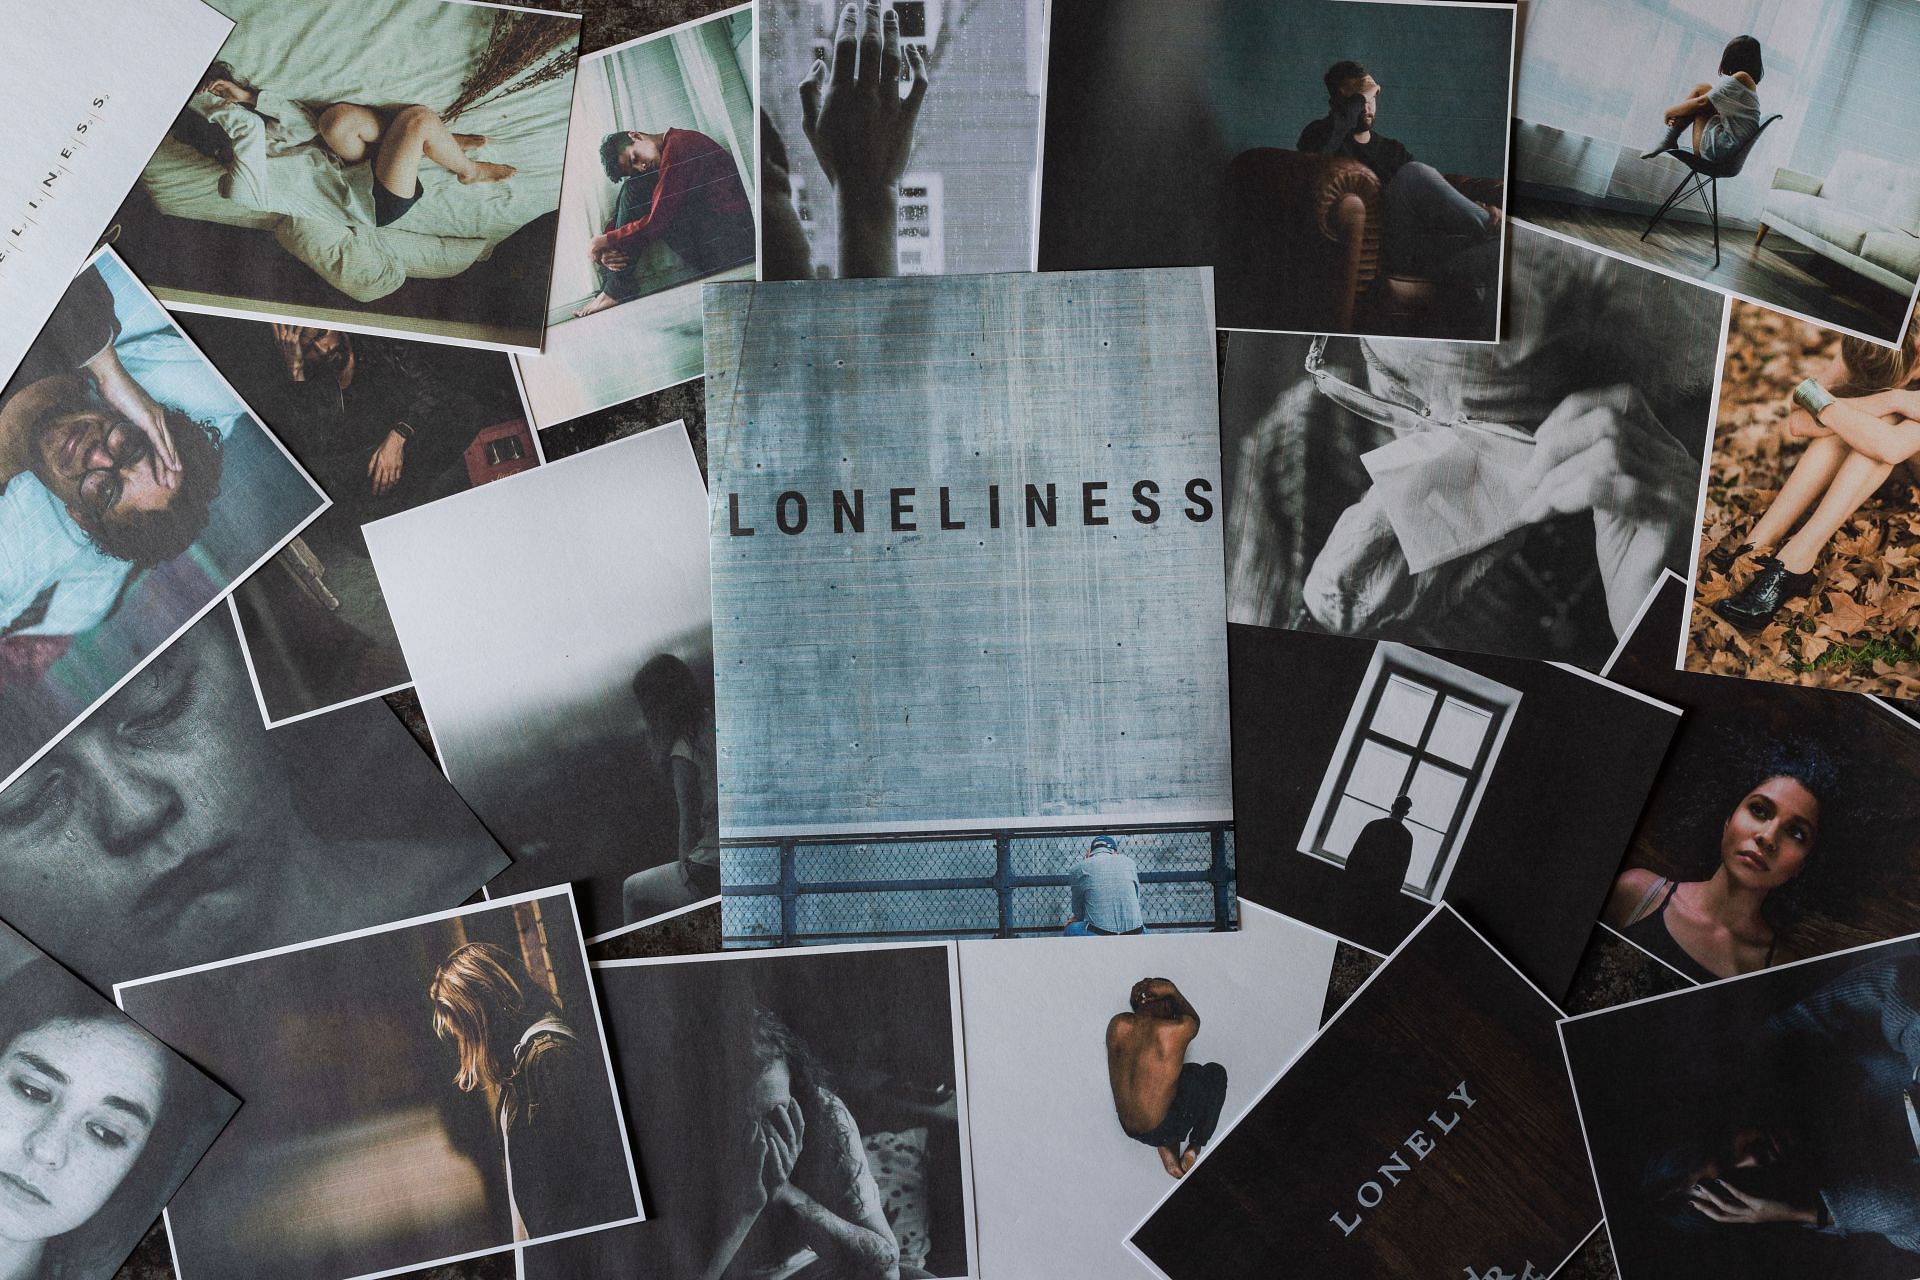 Loneliness can take over so many lives. ( Photo via Unsplash/ Micheile dot com )